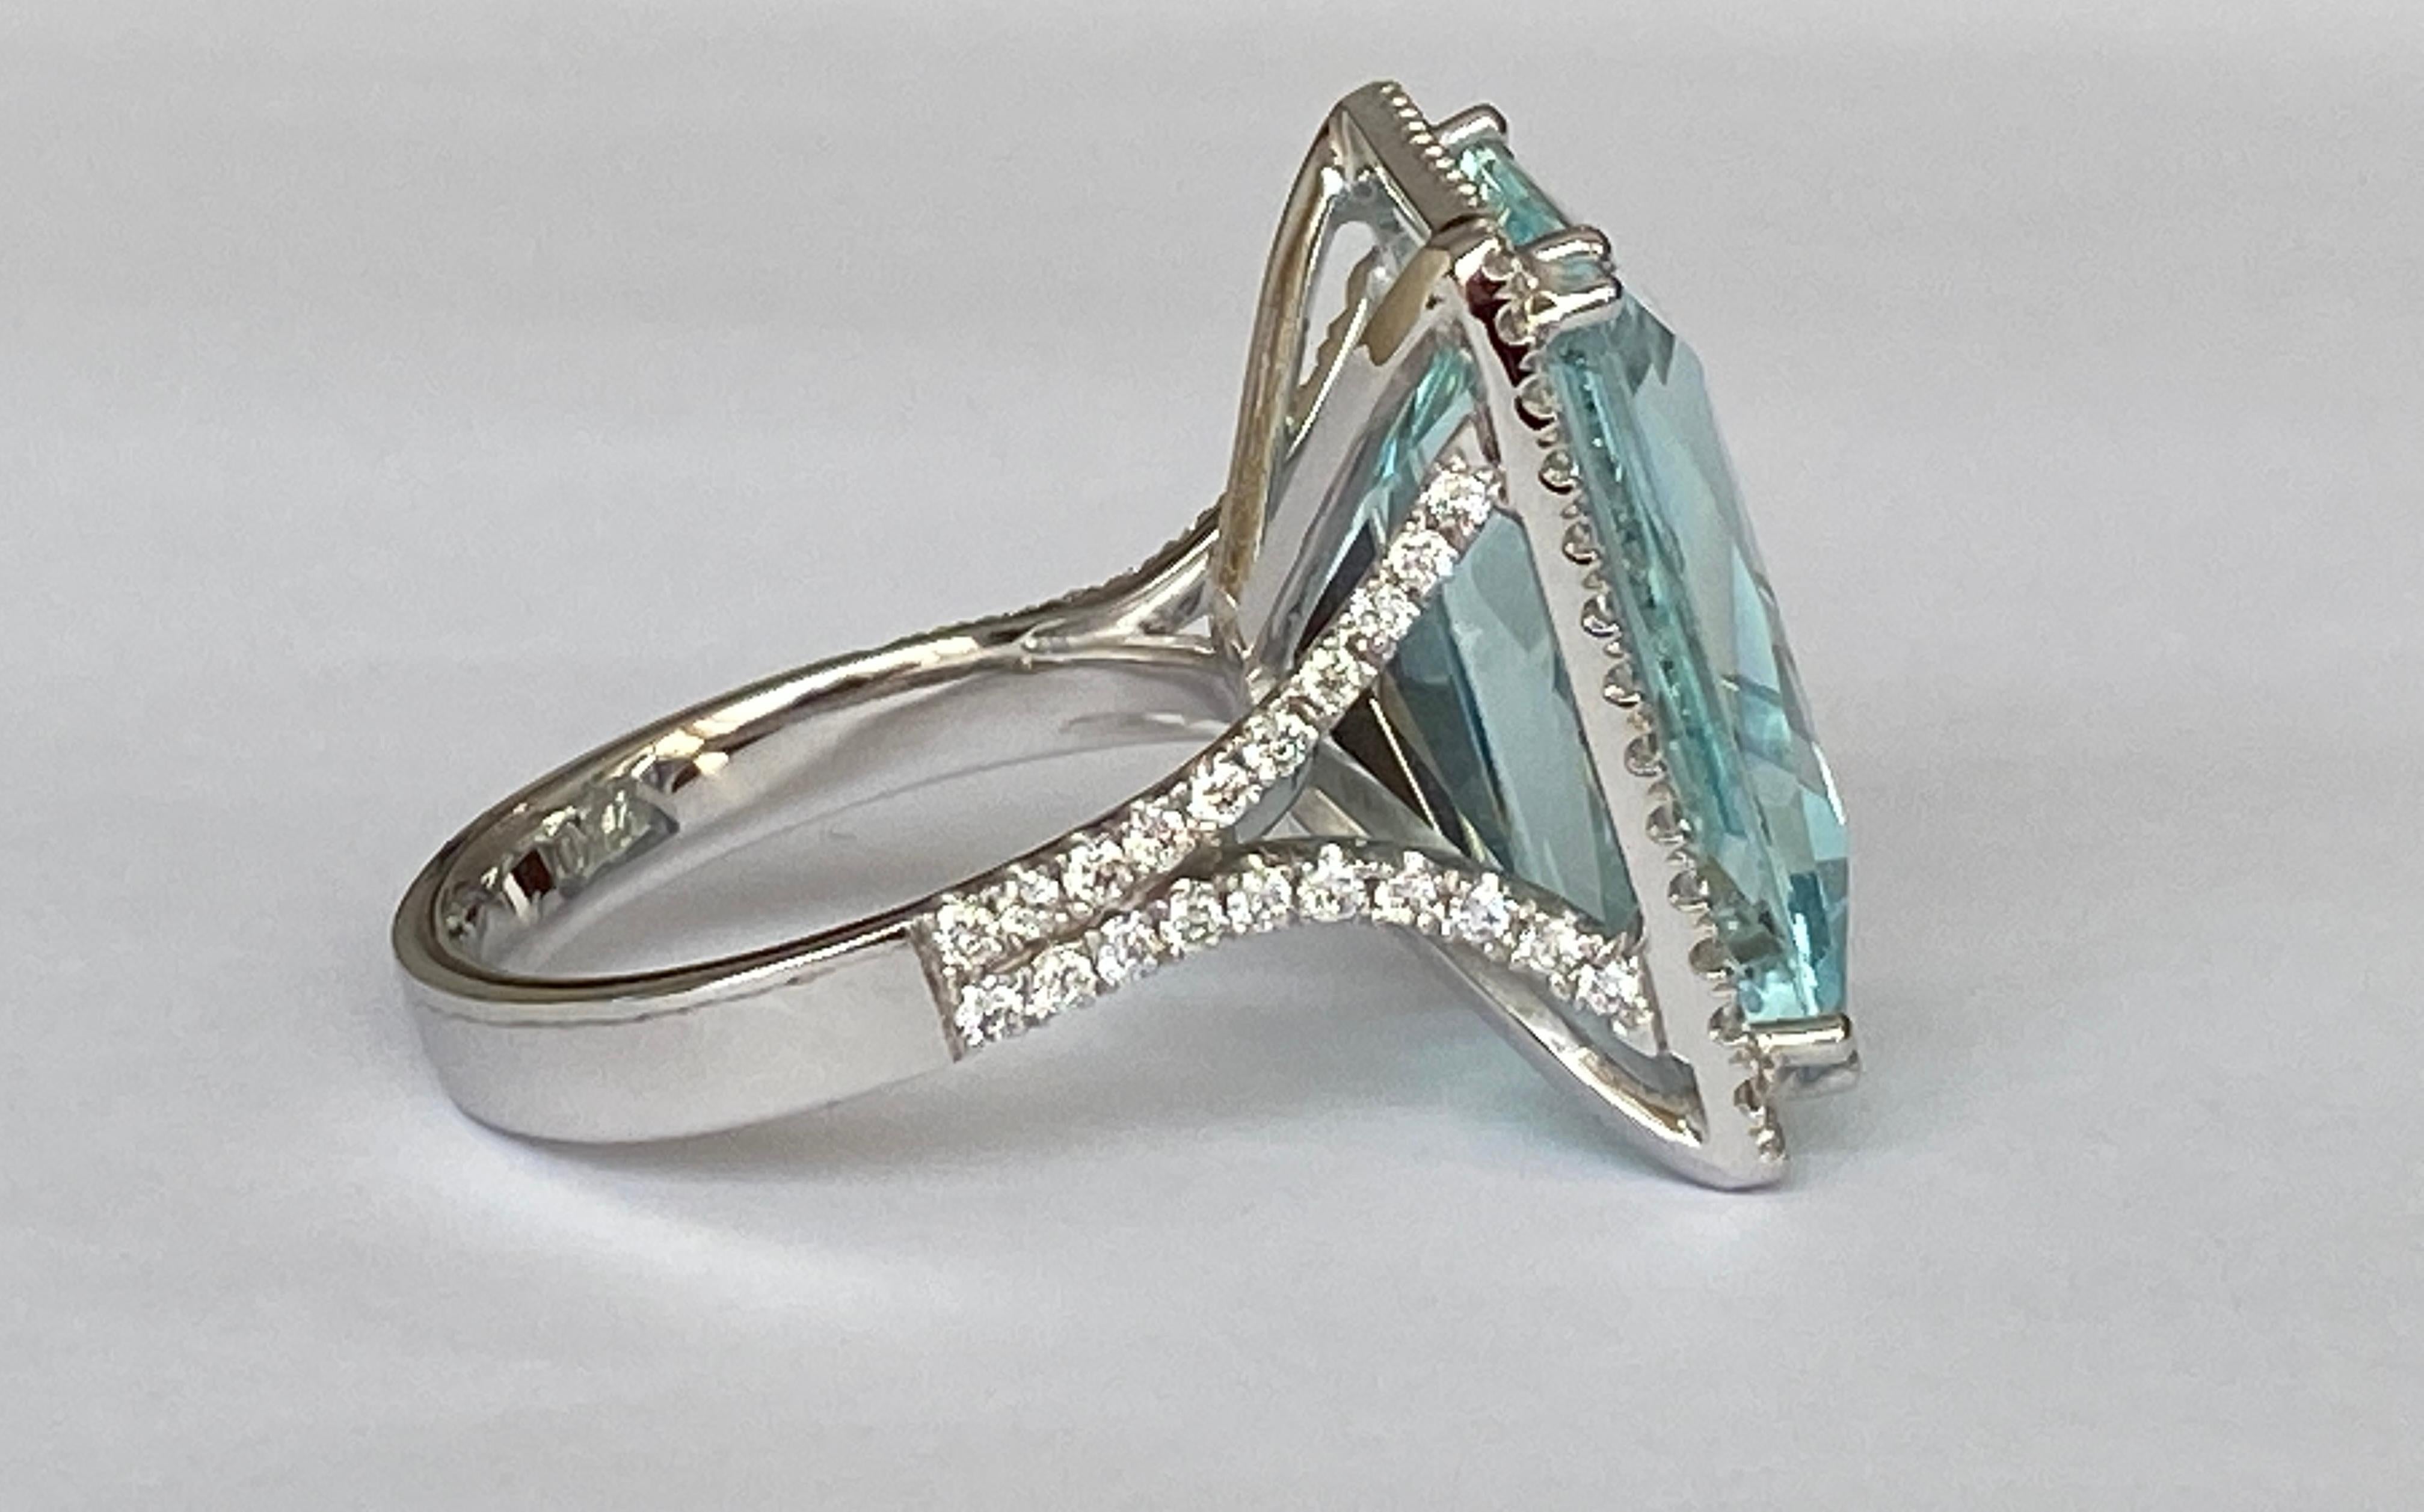 ALGT Certified 18 Karat White gold Ring with 18.00 Carat Aquamarine and Diamonds For Sale 2